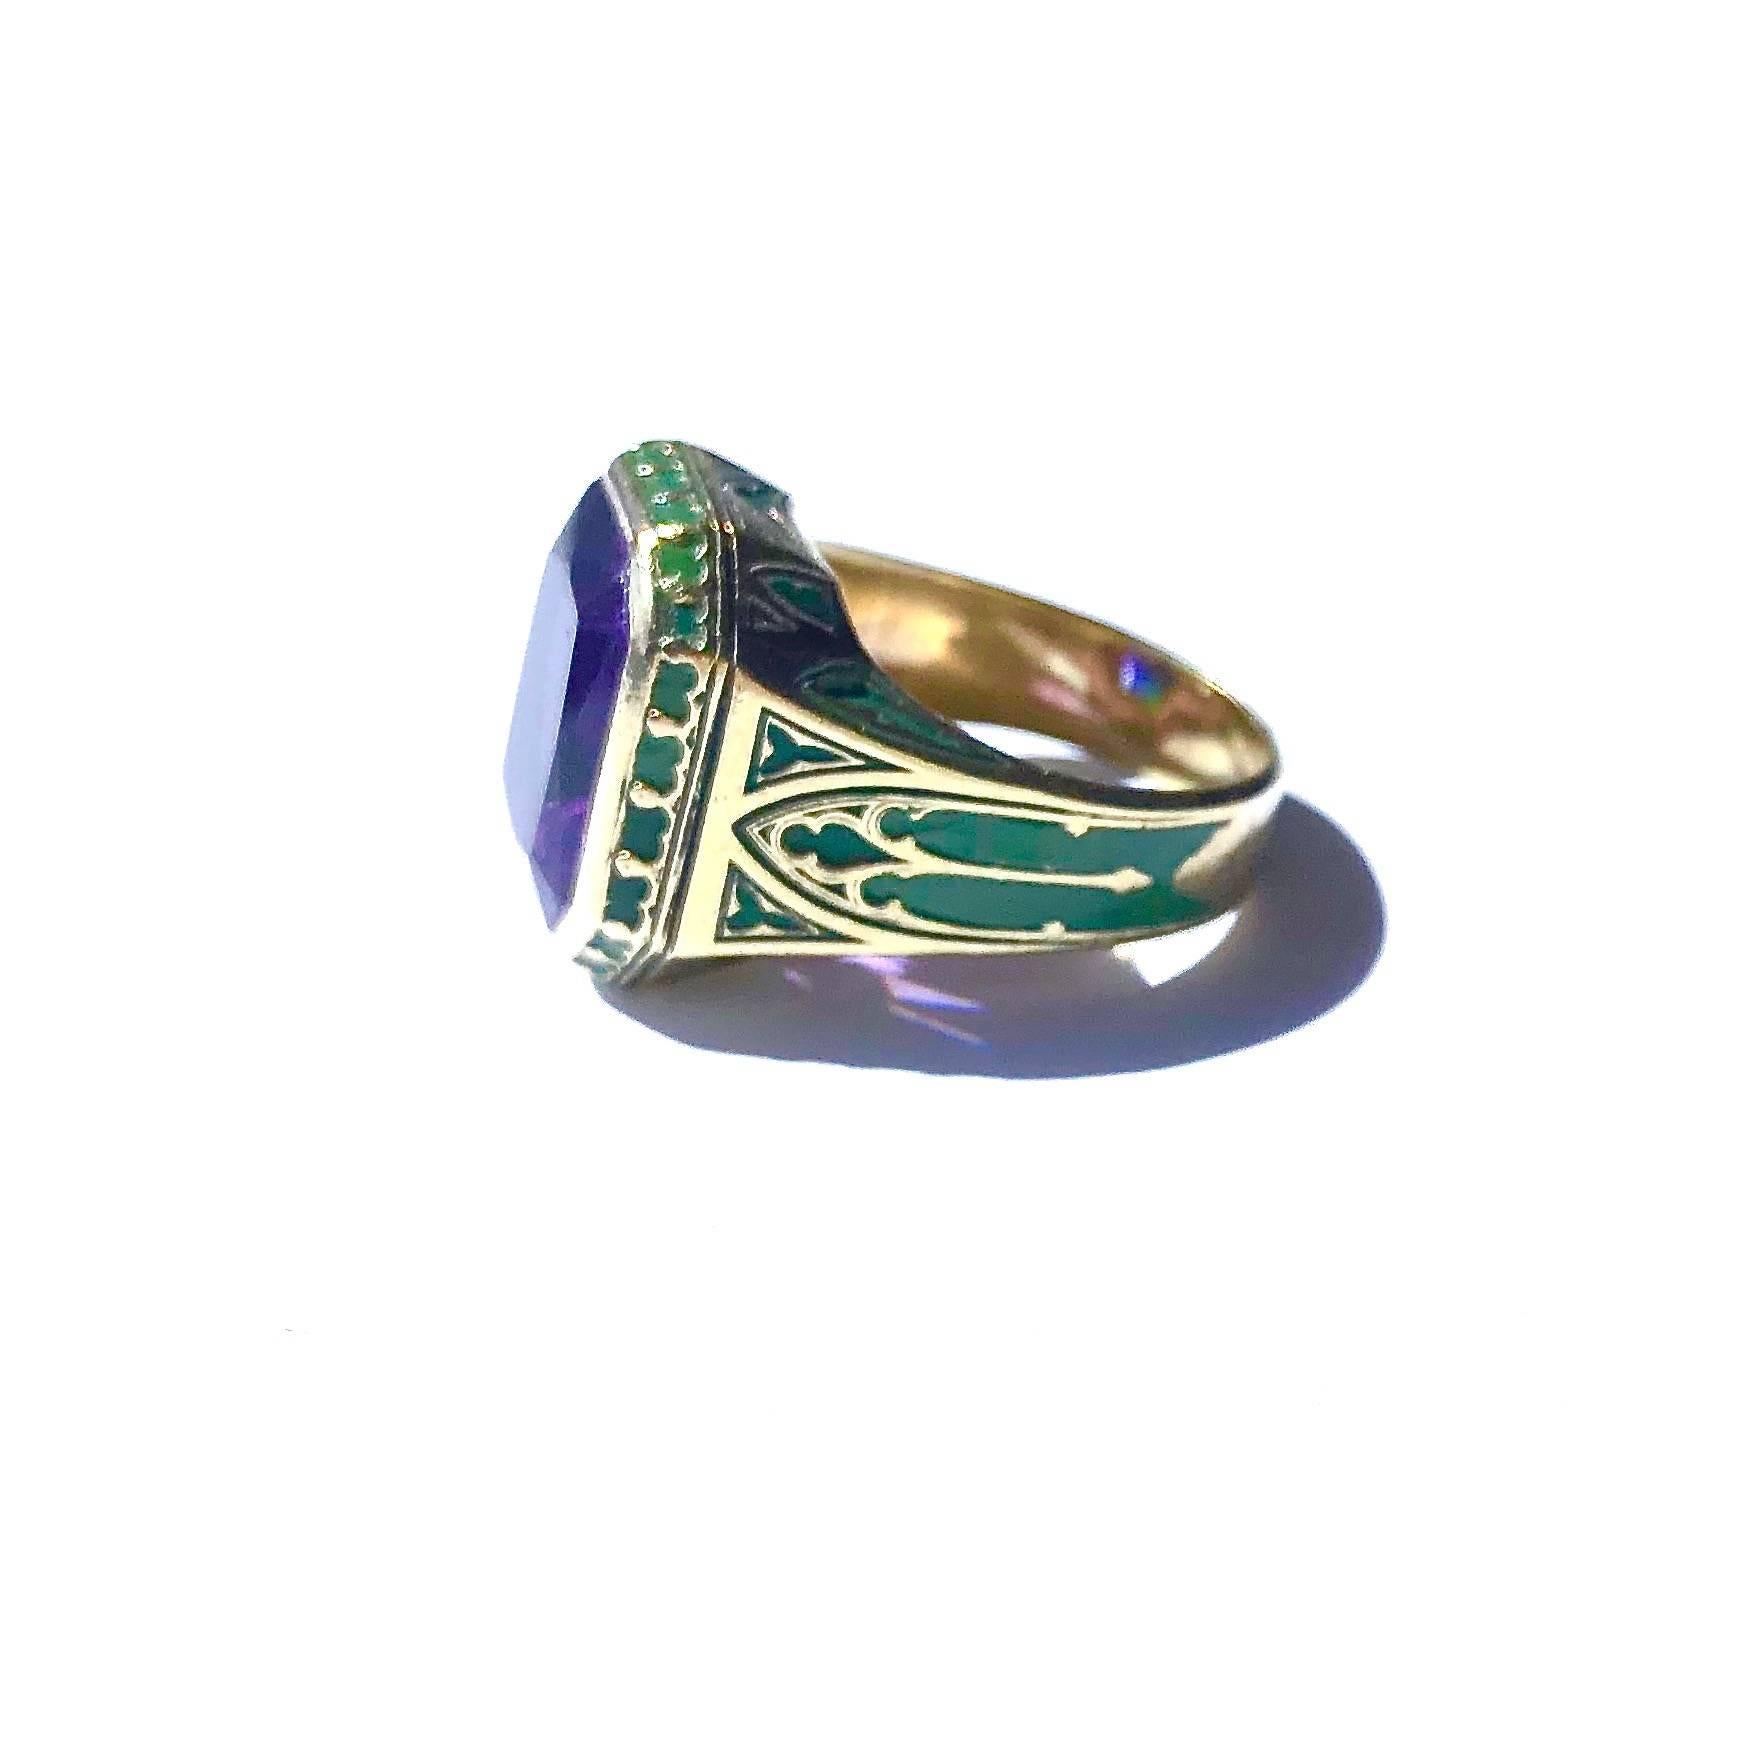 Crafted in 14K yellow gold, the ring features an approximately 10ct rectangular shape amethyst set within a gold bezel, supported by an eleven millimeter wide shoulders tapering down to a five millimeter wide band. The ring is decorated with